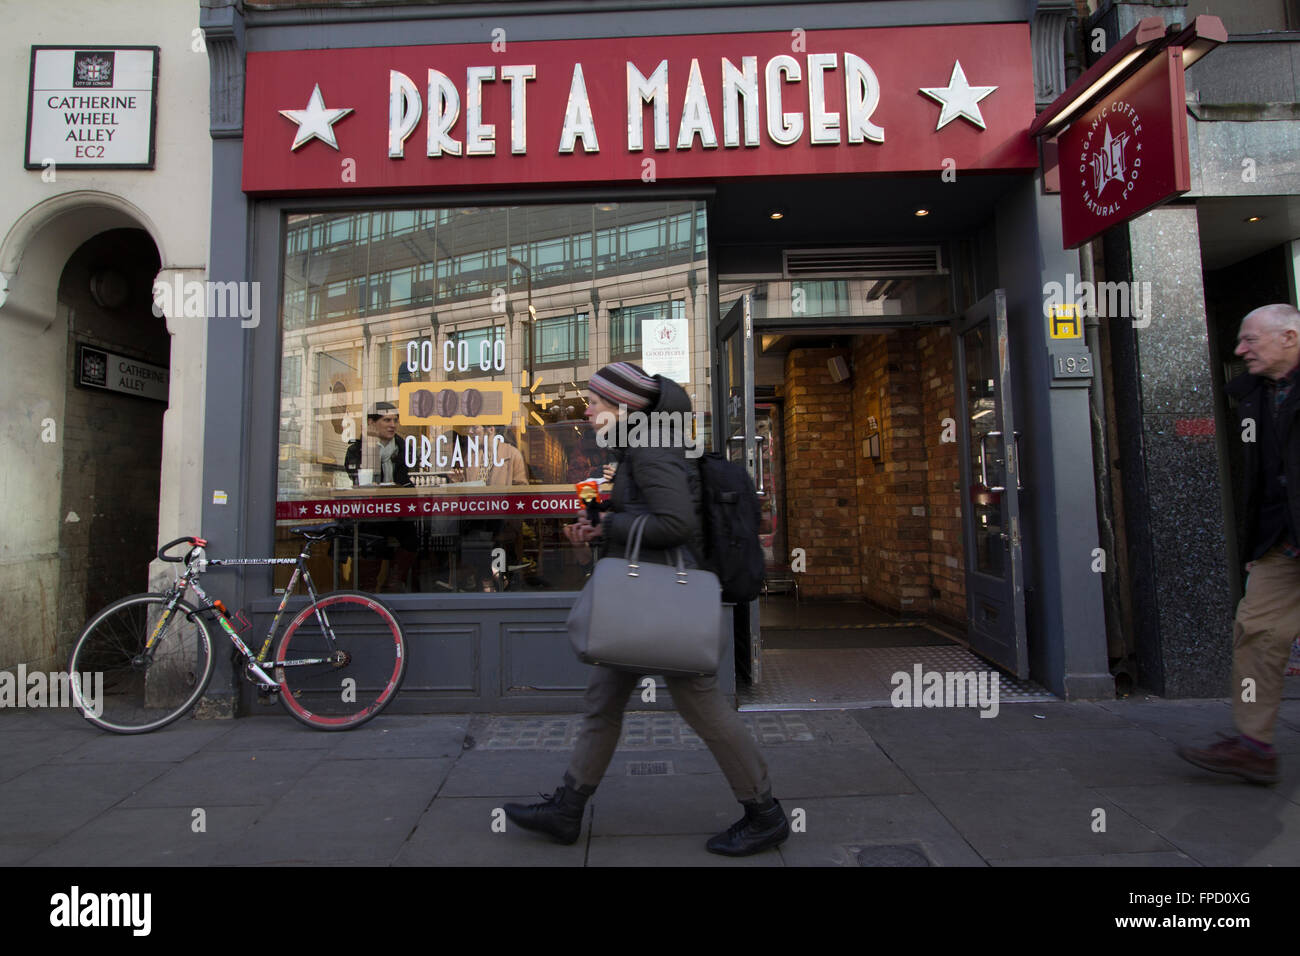 Pret a Manger Restaurant and coffee shop London Stock Photo